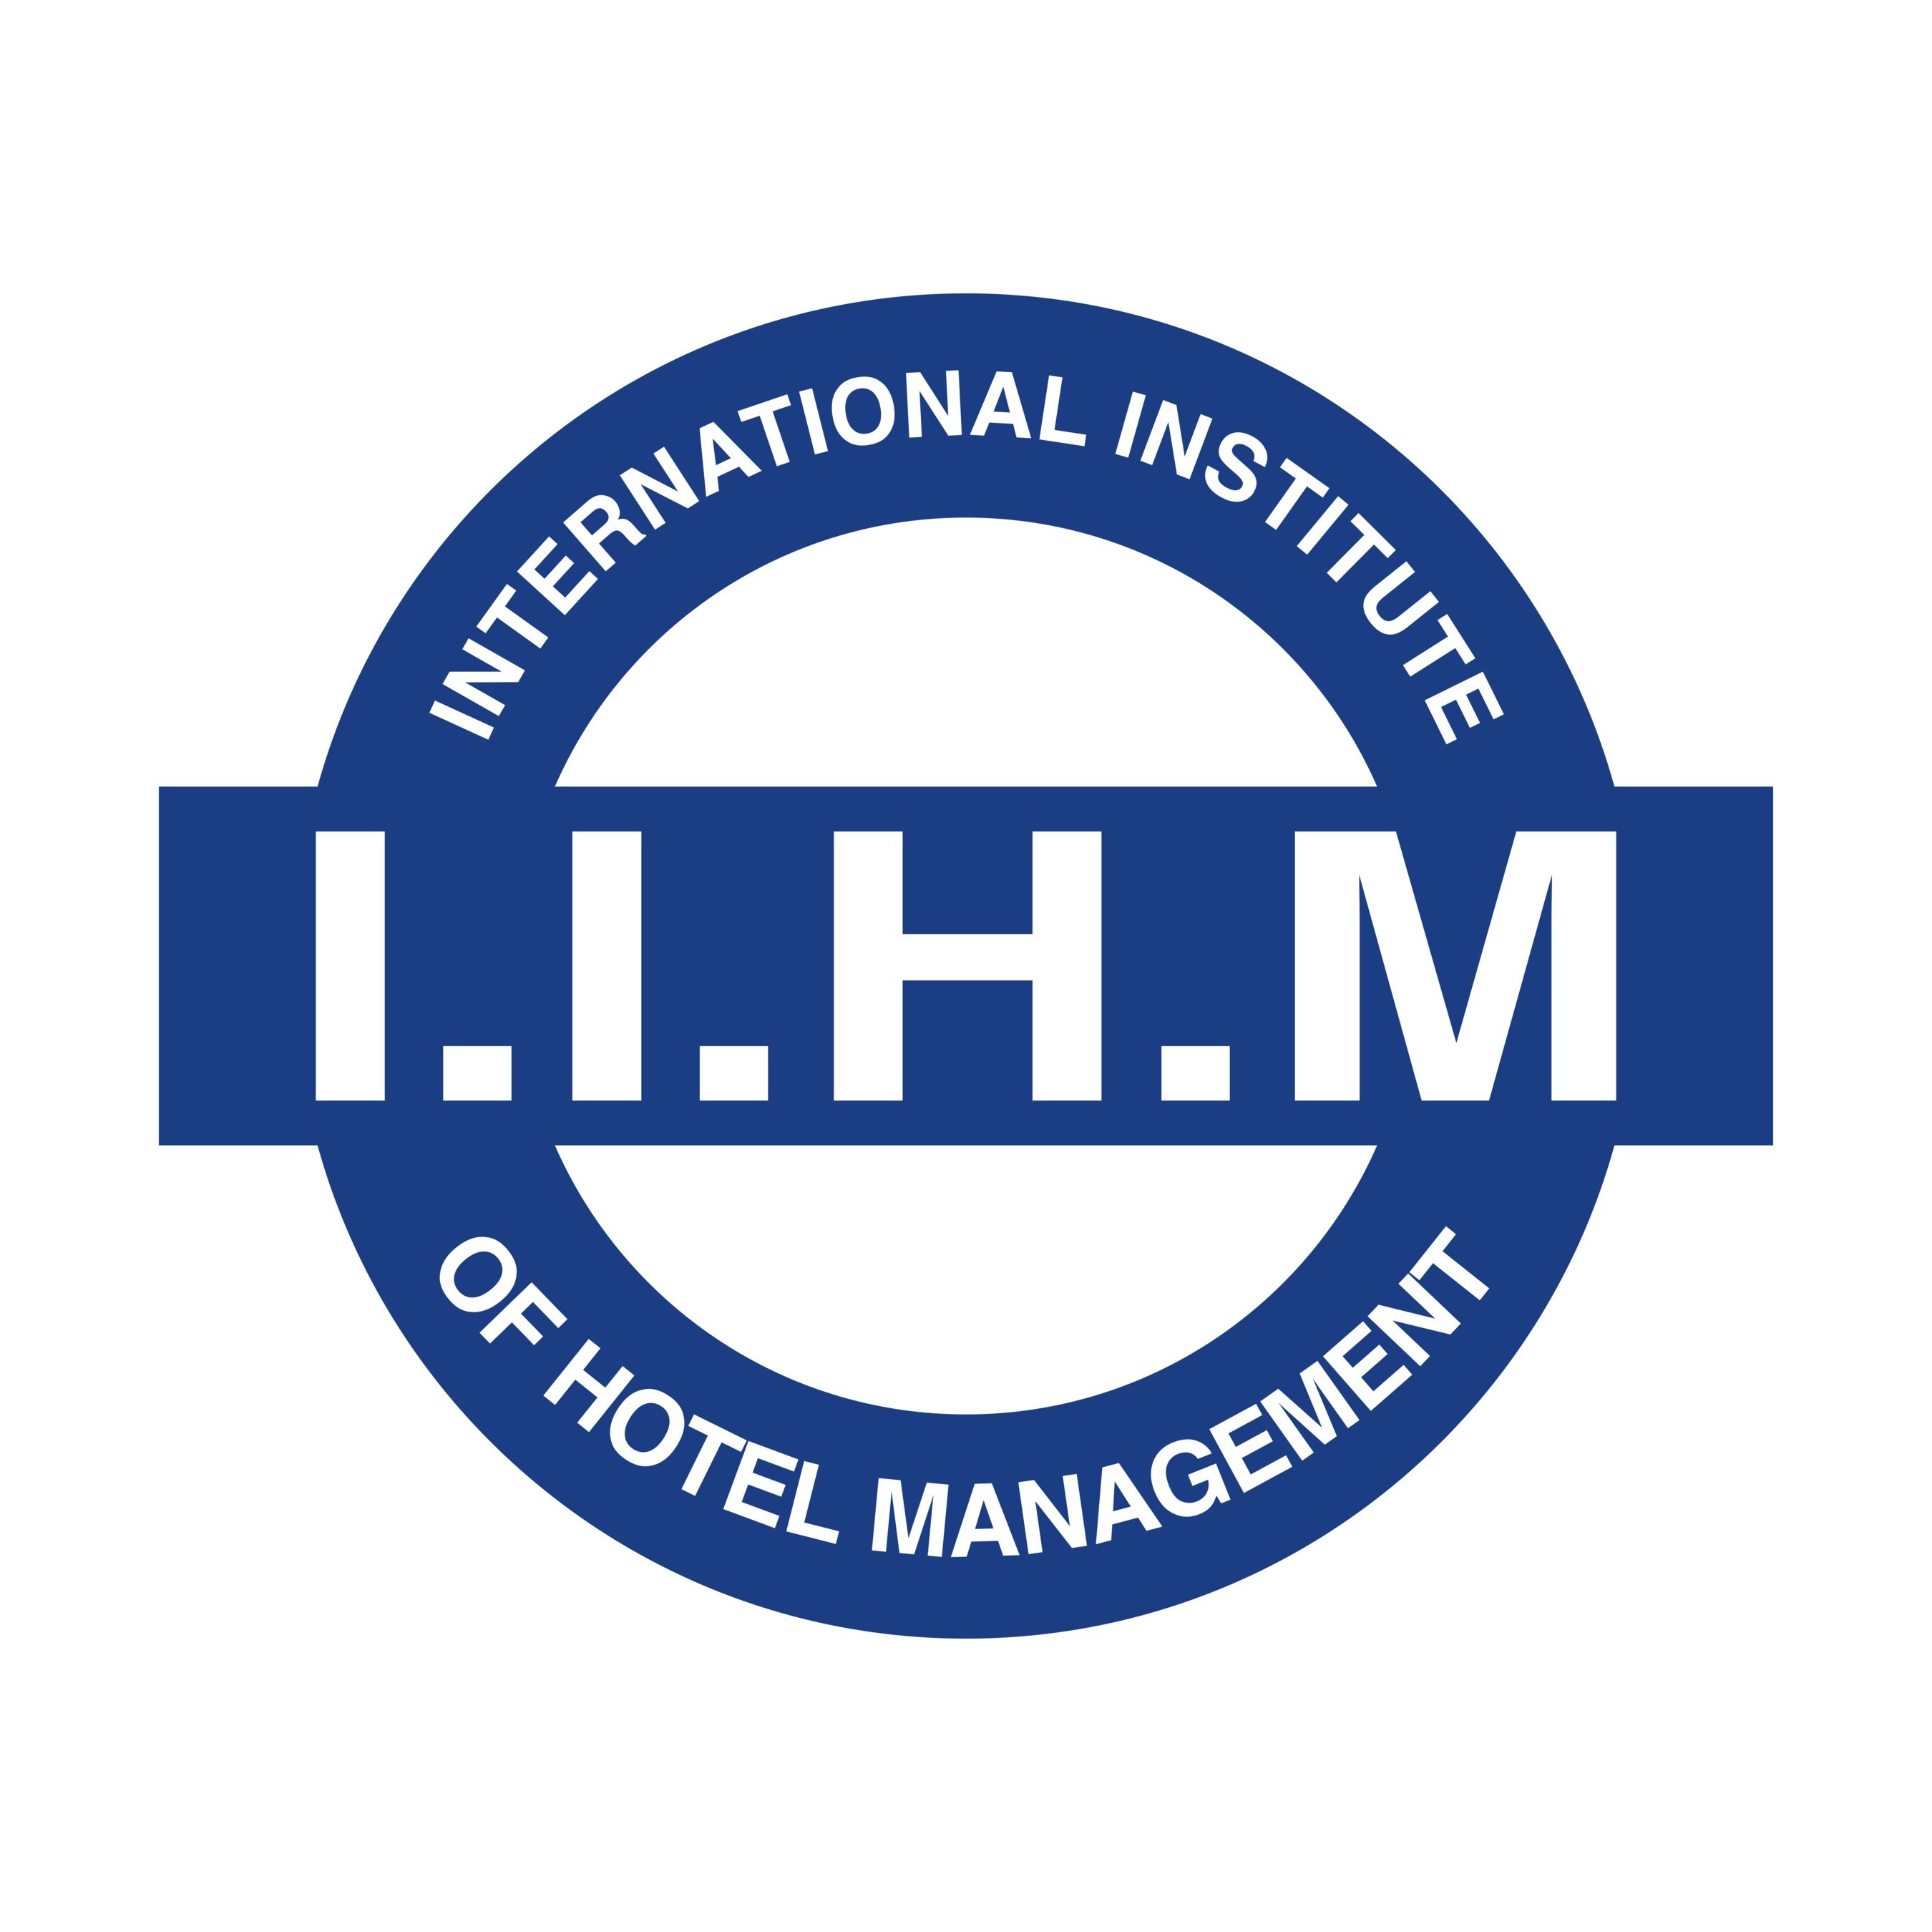 Welcome to the IHM Conference/Retreat Center